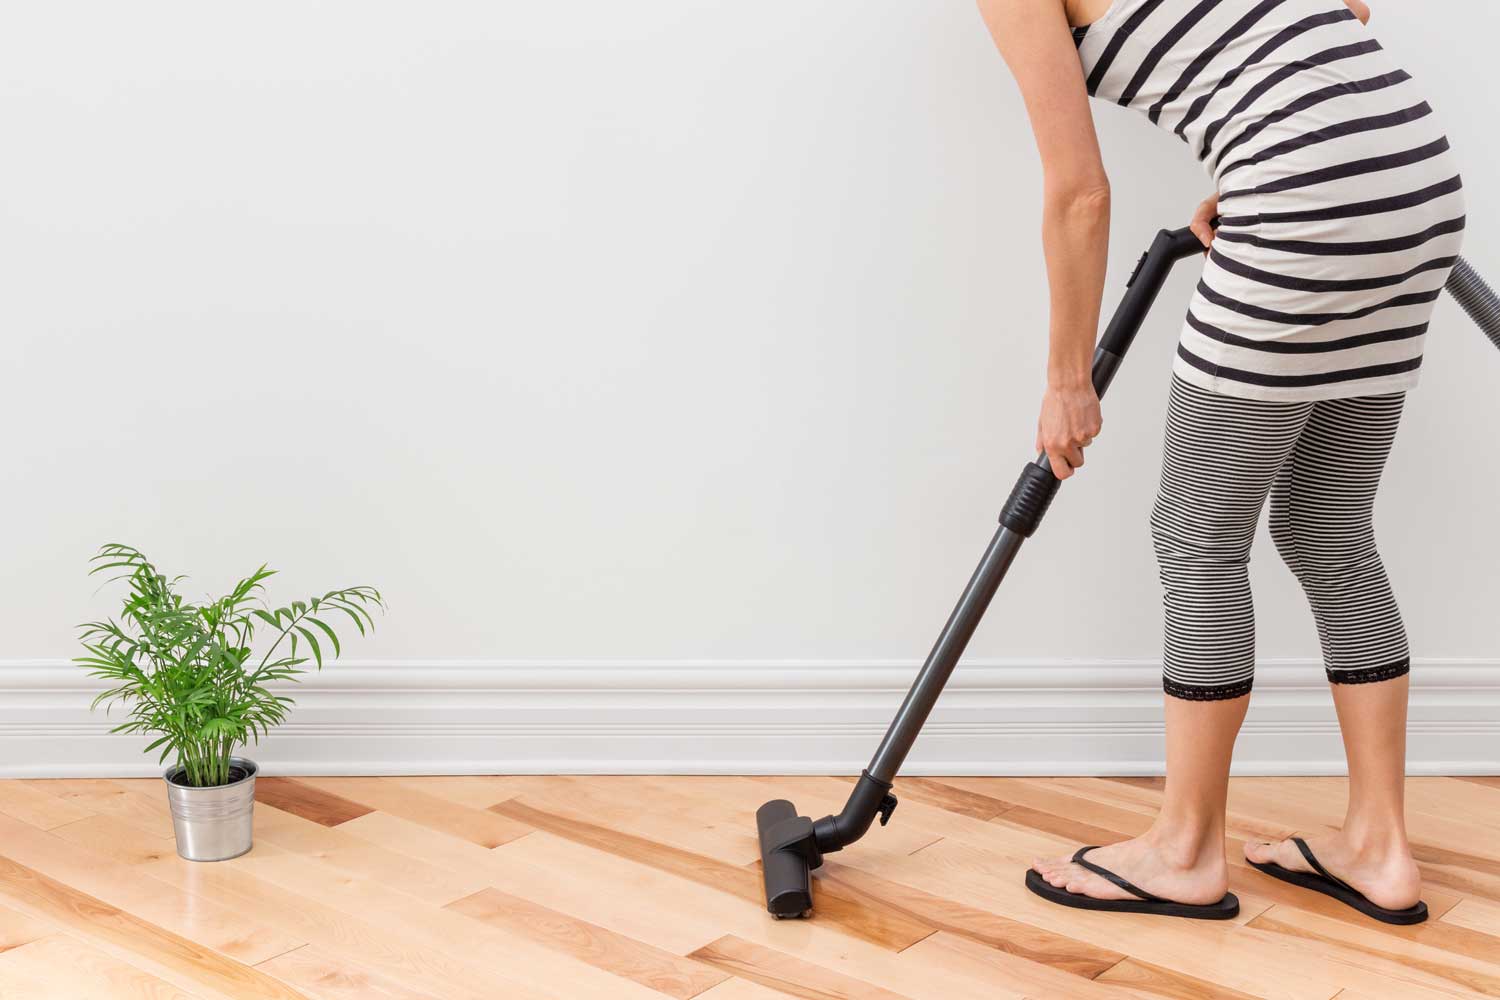 Regulary vacuum or sweep floors to remove dirt and keep your home floors looking amazing - tips from Footprints Floors.